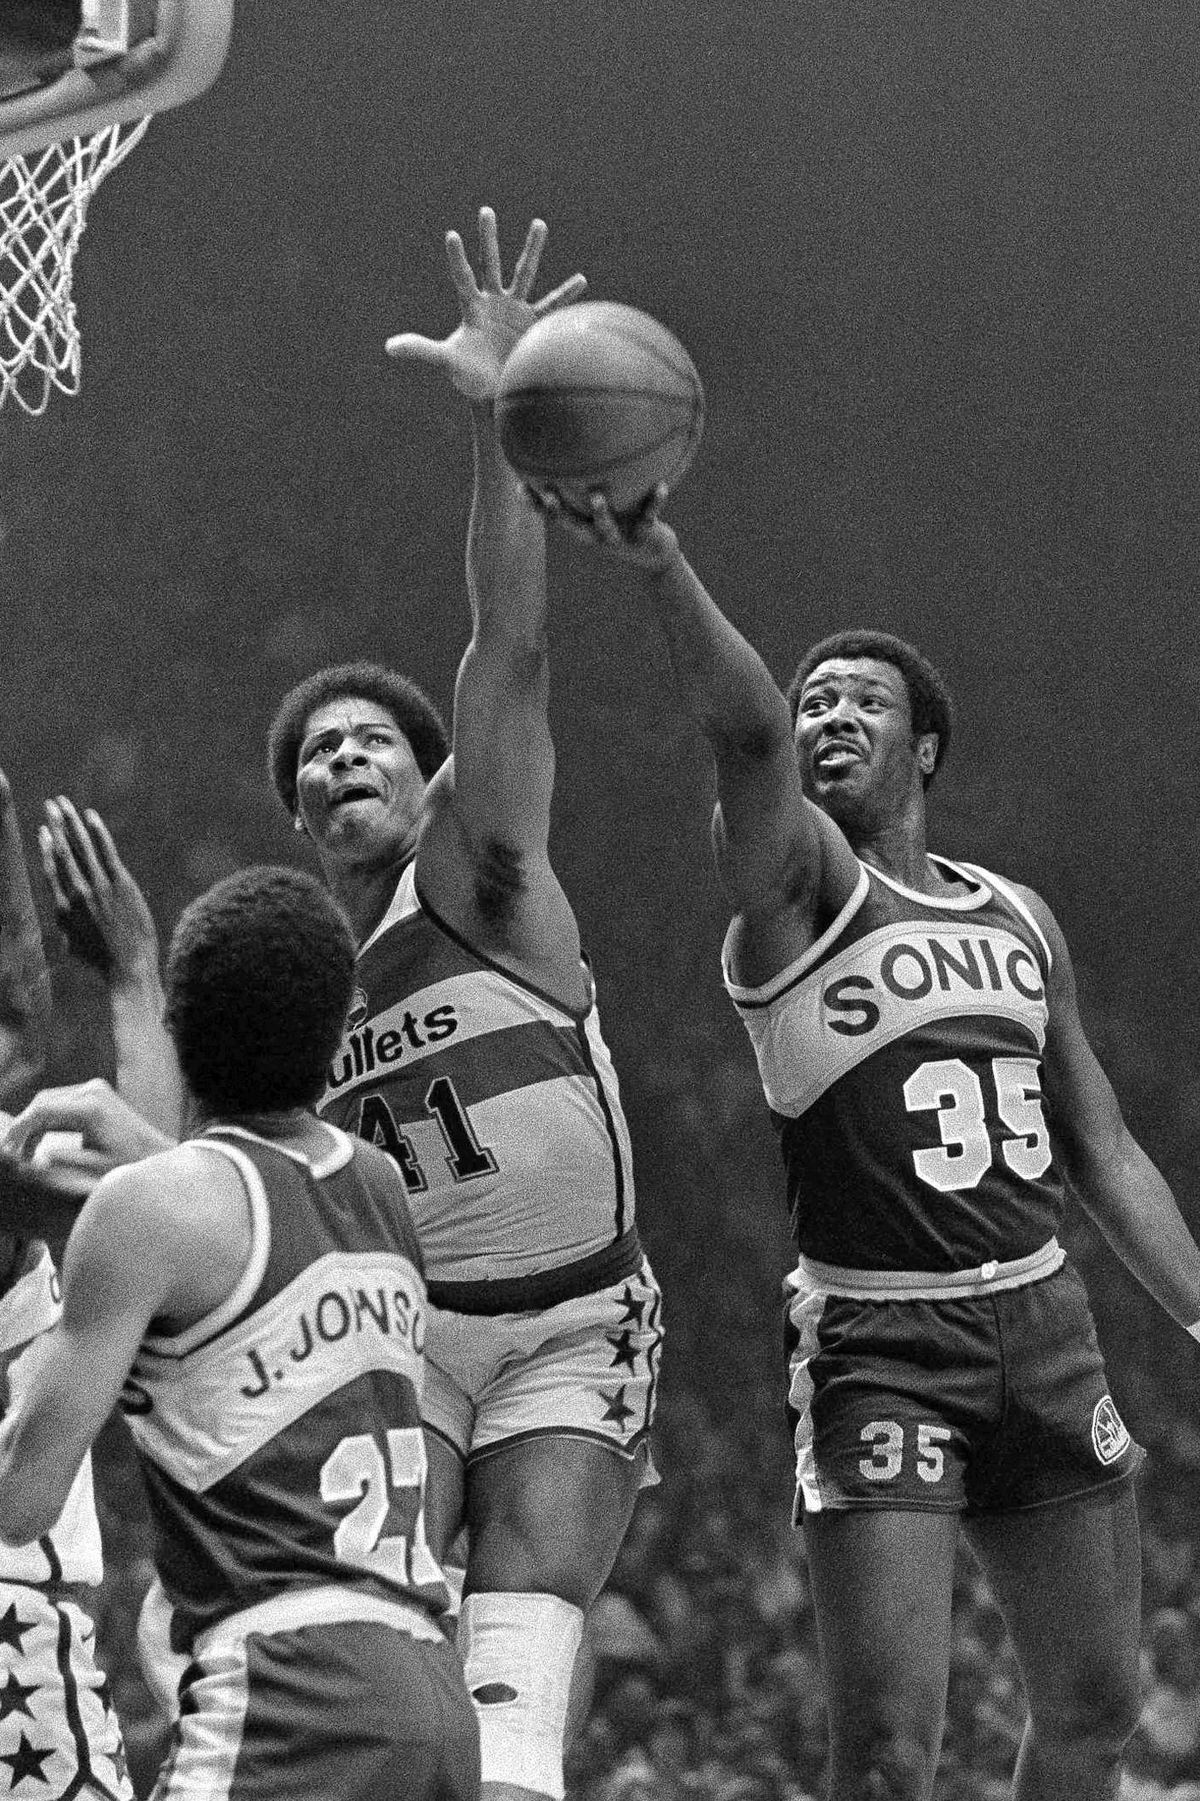 In this May 25, 1979 photo, Washington Bullets’ Wes Unseld (41) reaches to block a shot by Seattle Supersonics’ Paul Silas (35) during an NBA basketball game in Landover, Md. (Smith / AP)